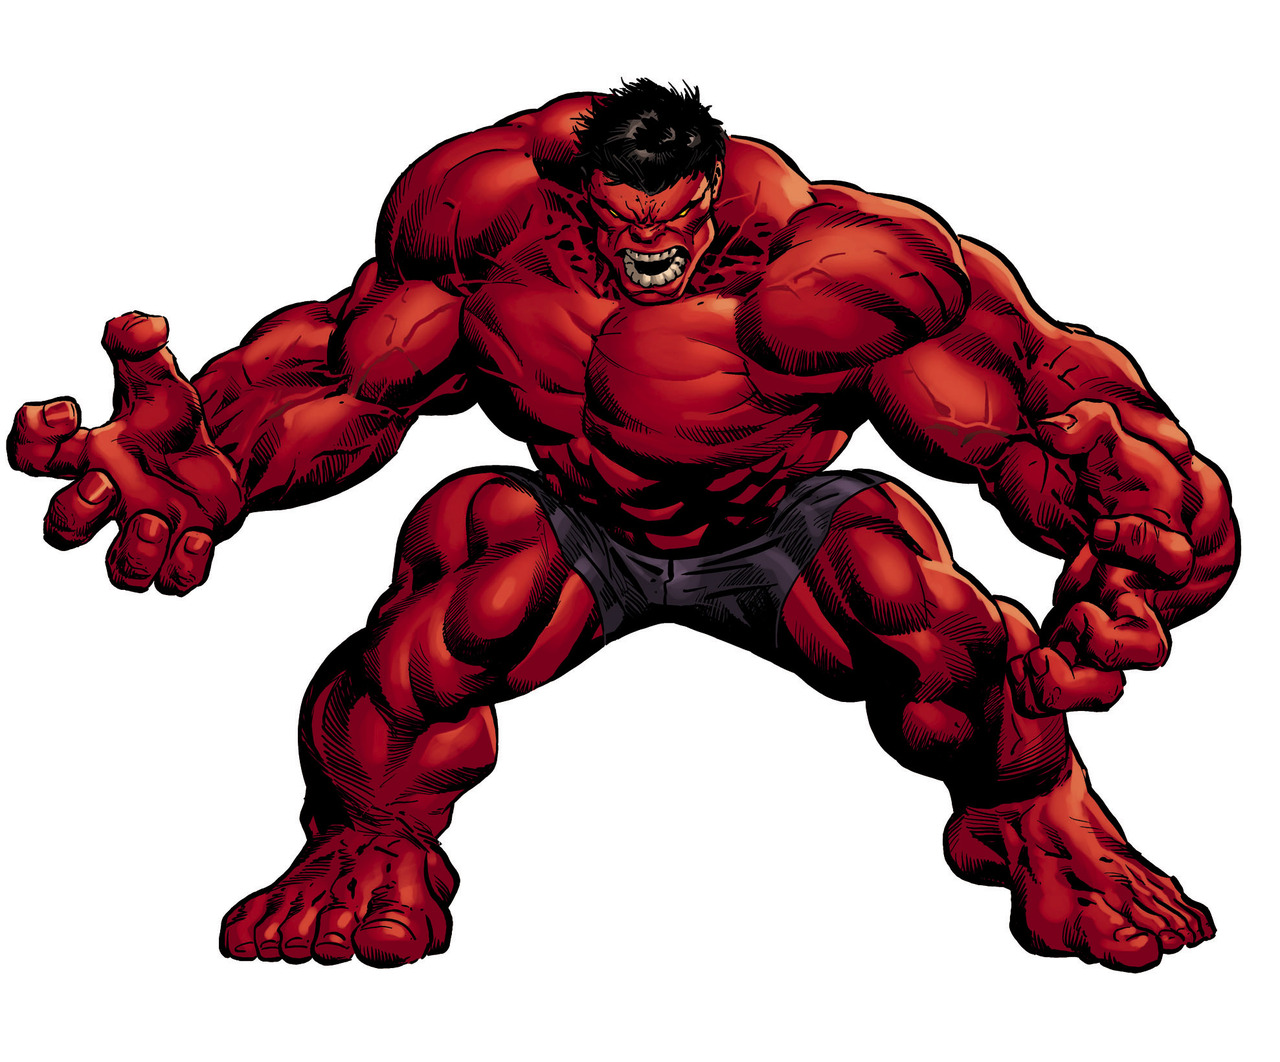 Red Hulk Backgrounds on Wallpapers Vista